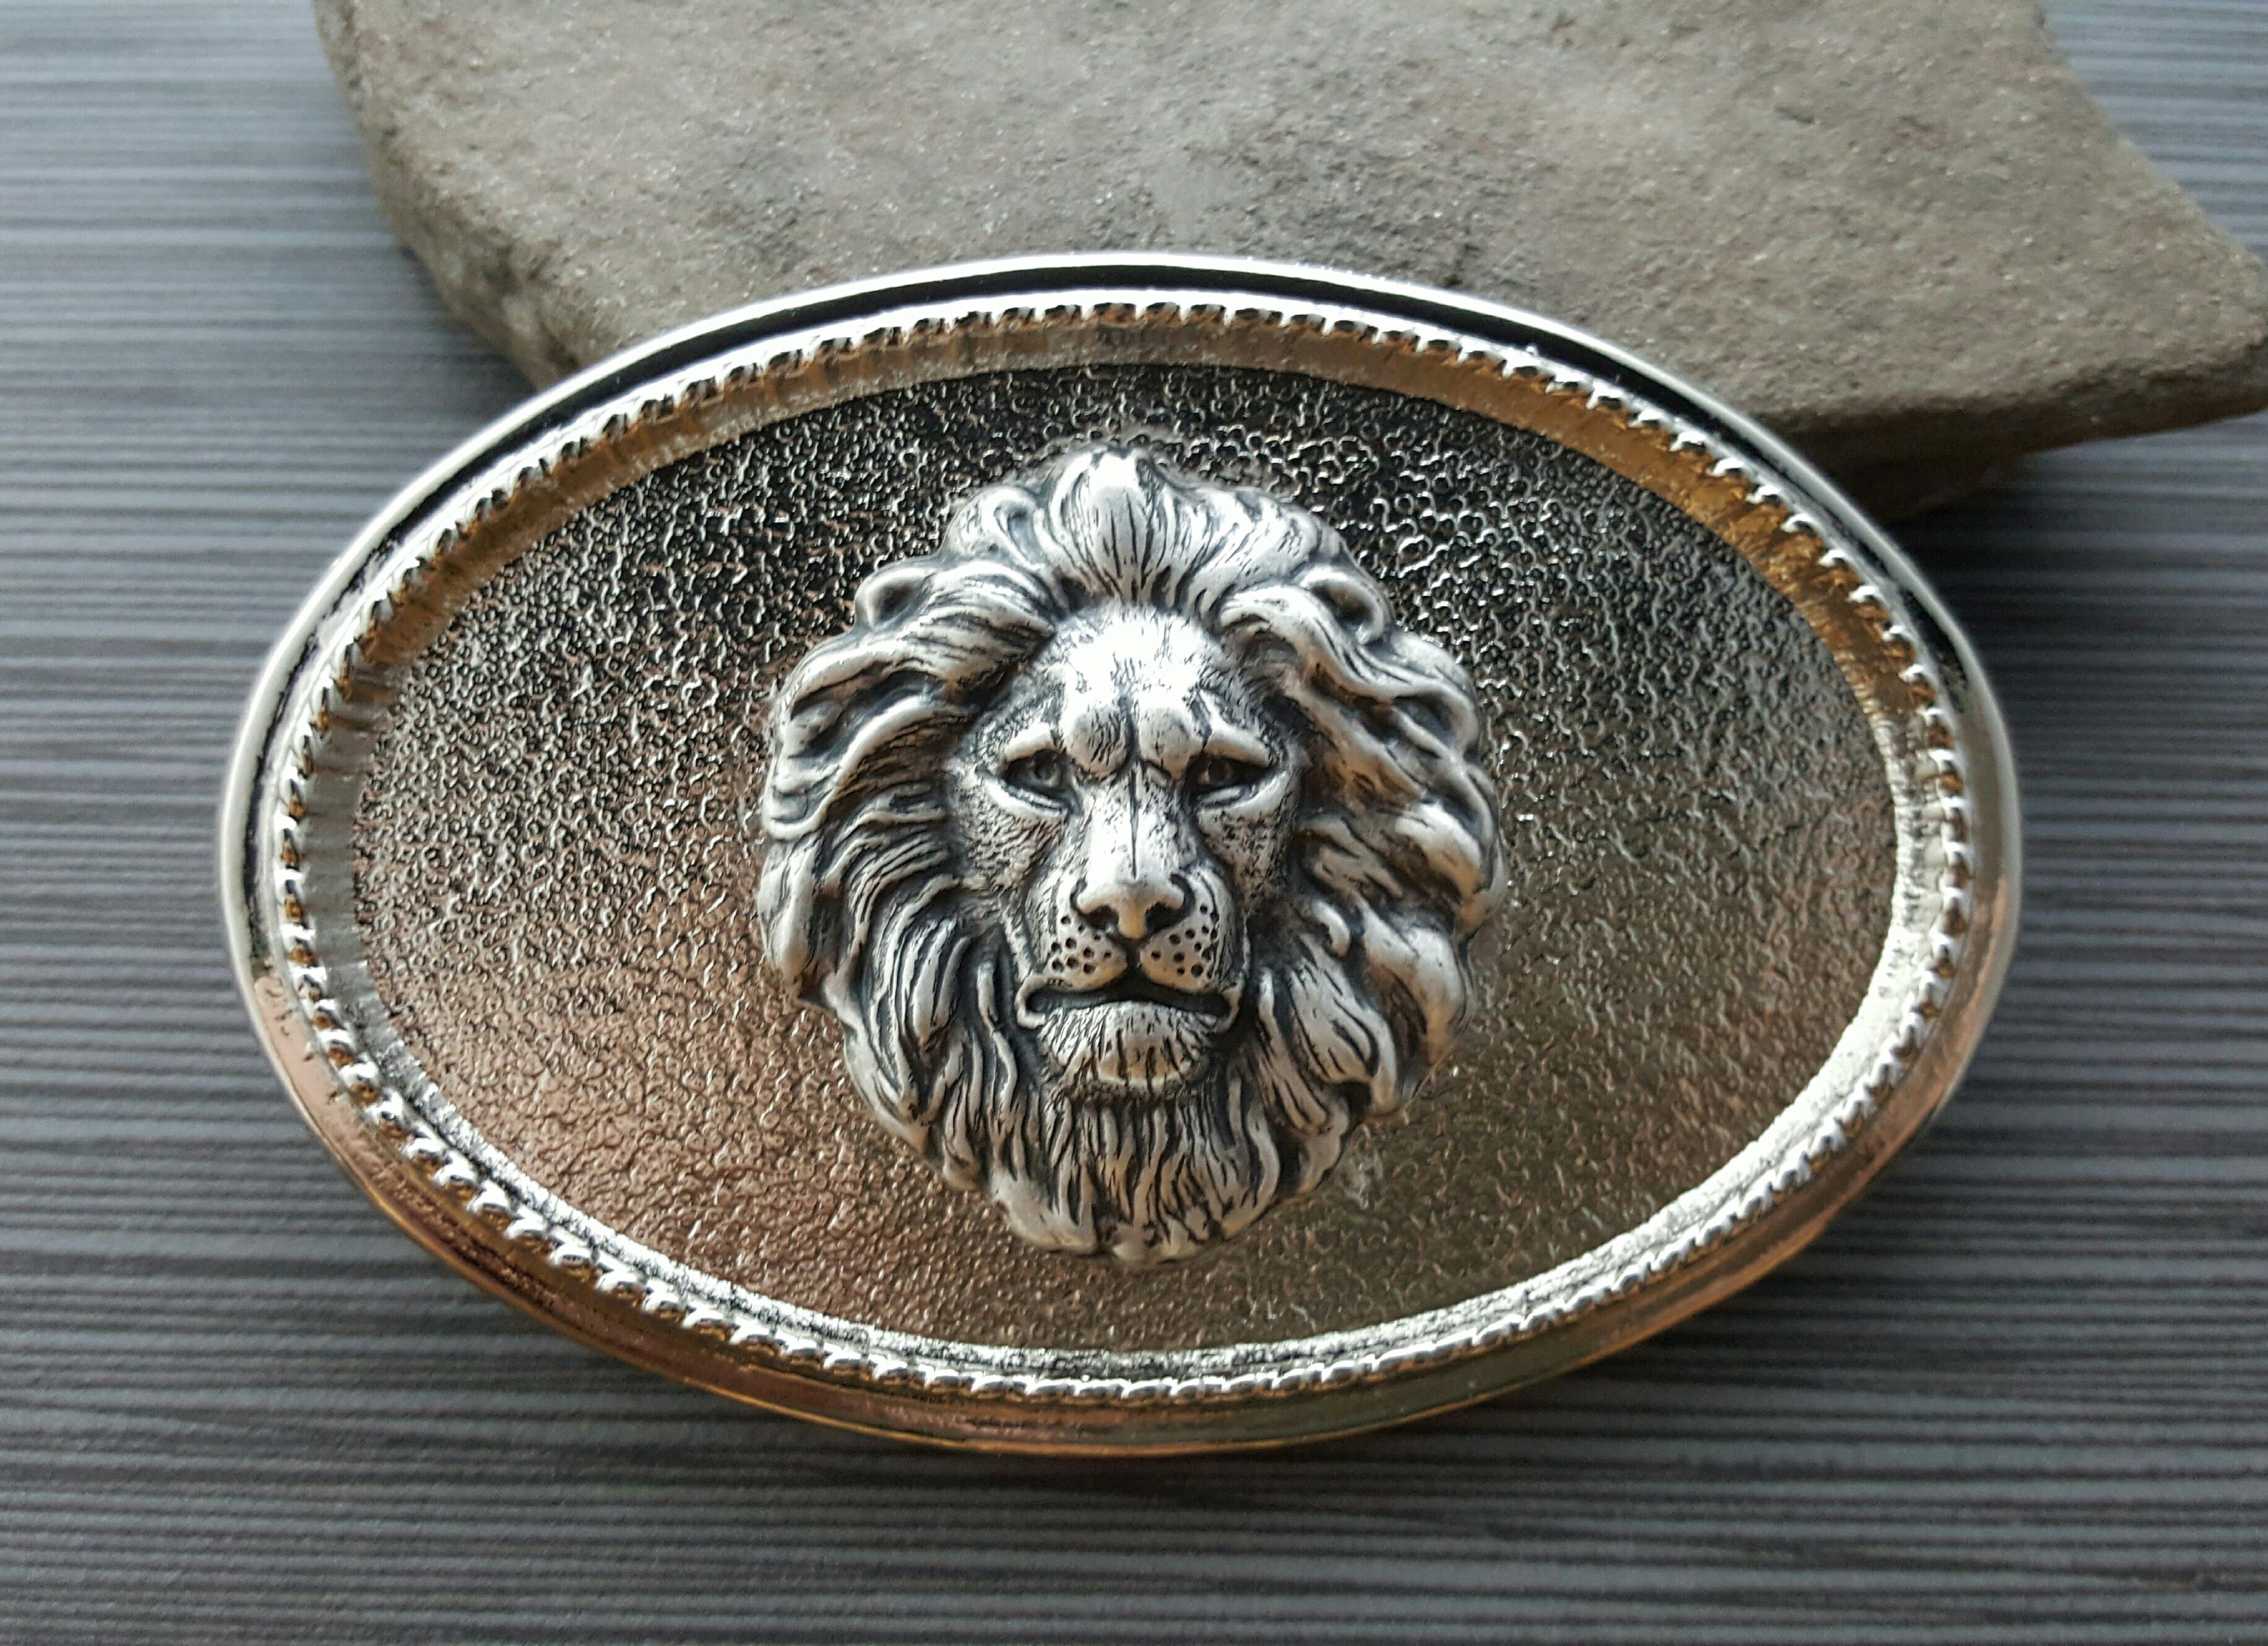 Buy a Hand Crafted Handmade Oxidized Silver Brass Steampunk Lion Belt Buckle, made to order from ...